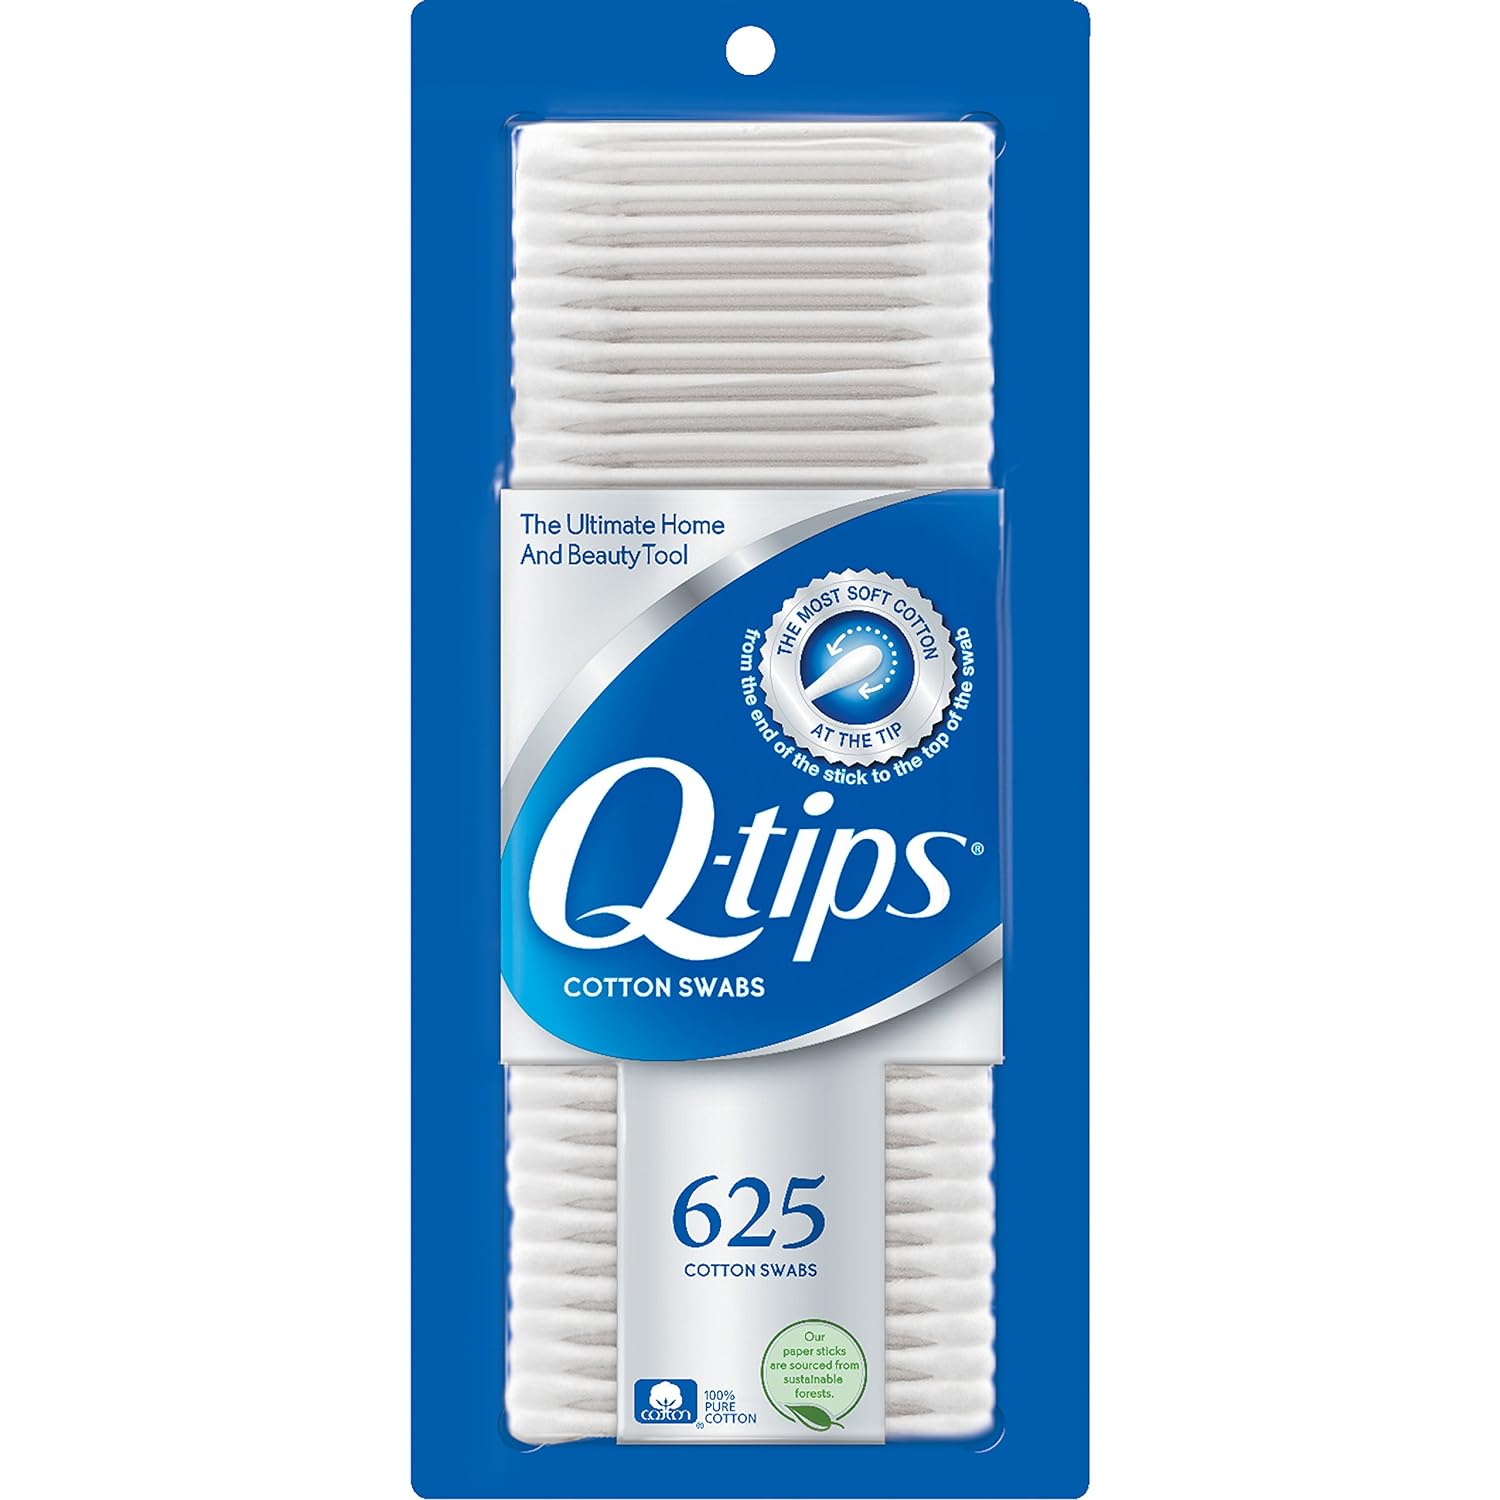 Q-tips Cotton Swabs For Hygiene and Beauty Care